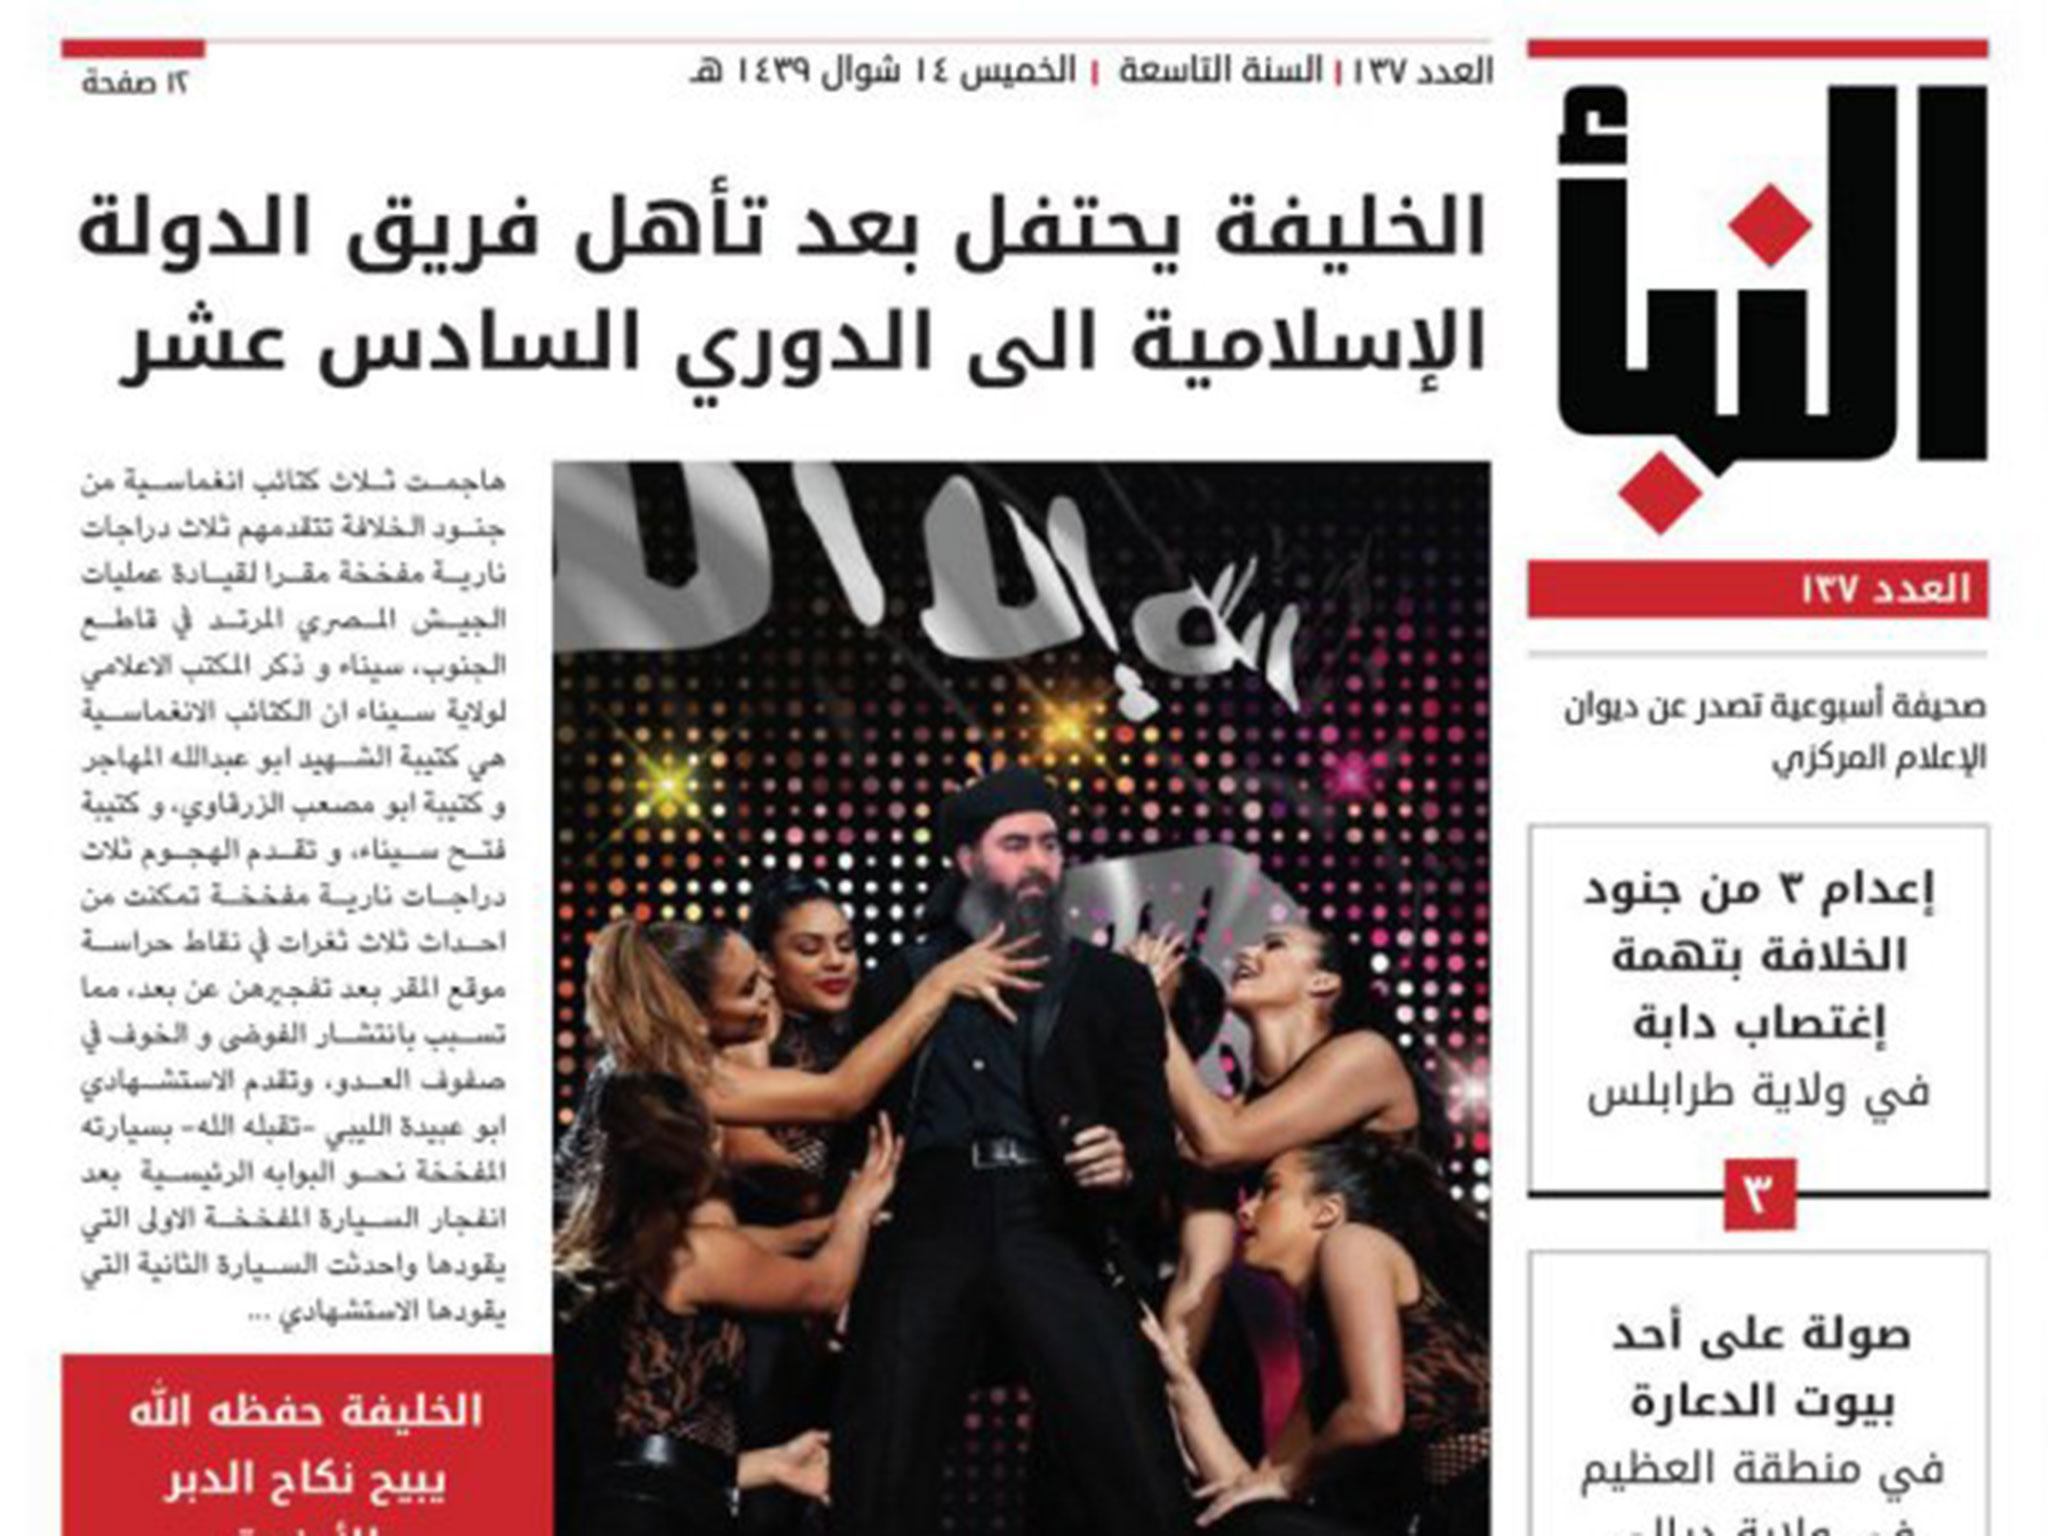 A fake version of Isis' weekly al-Naba newsletter circulated by the Daeshgram group of activists